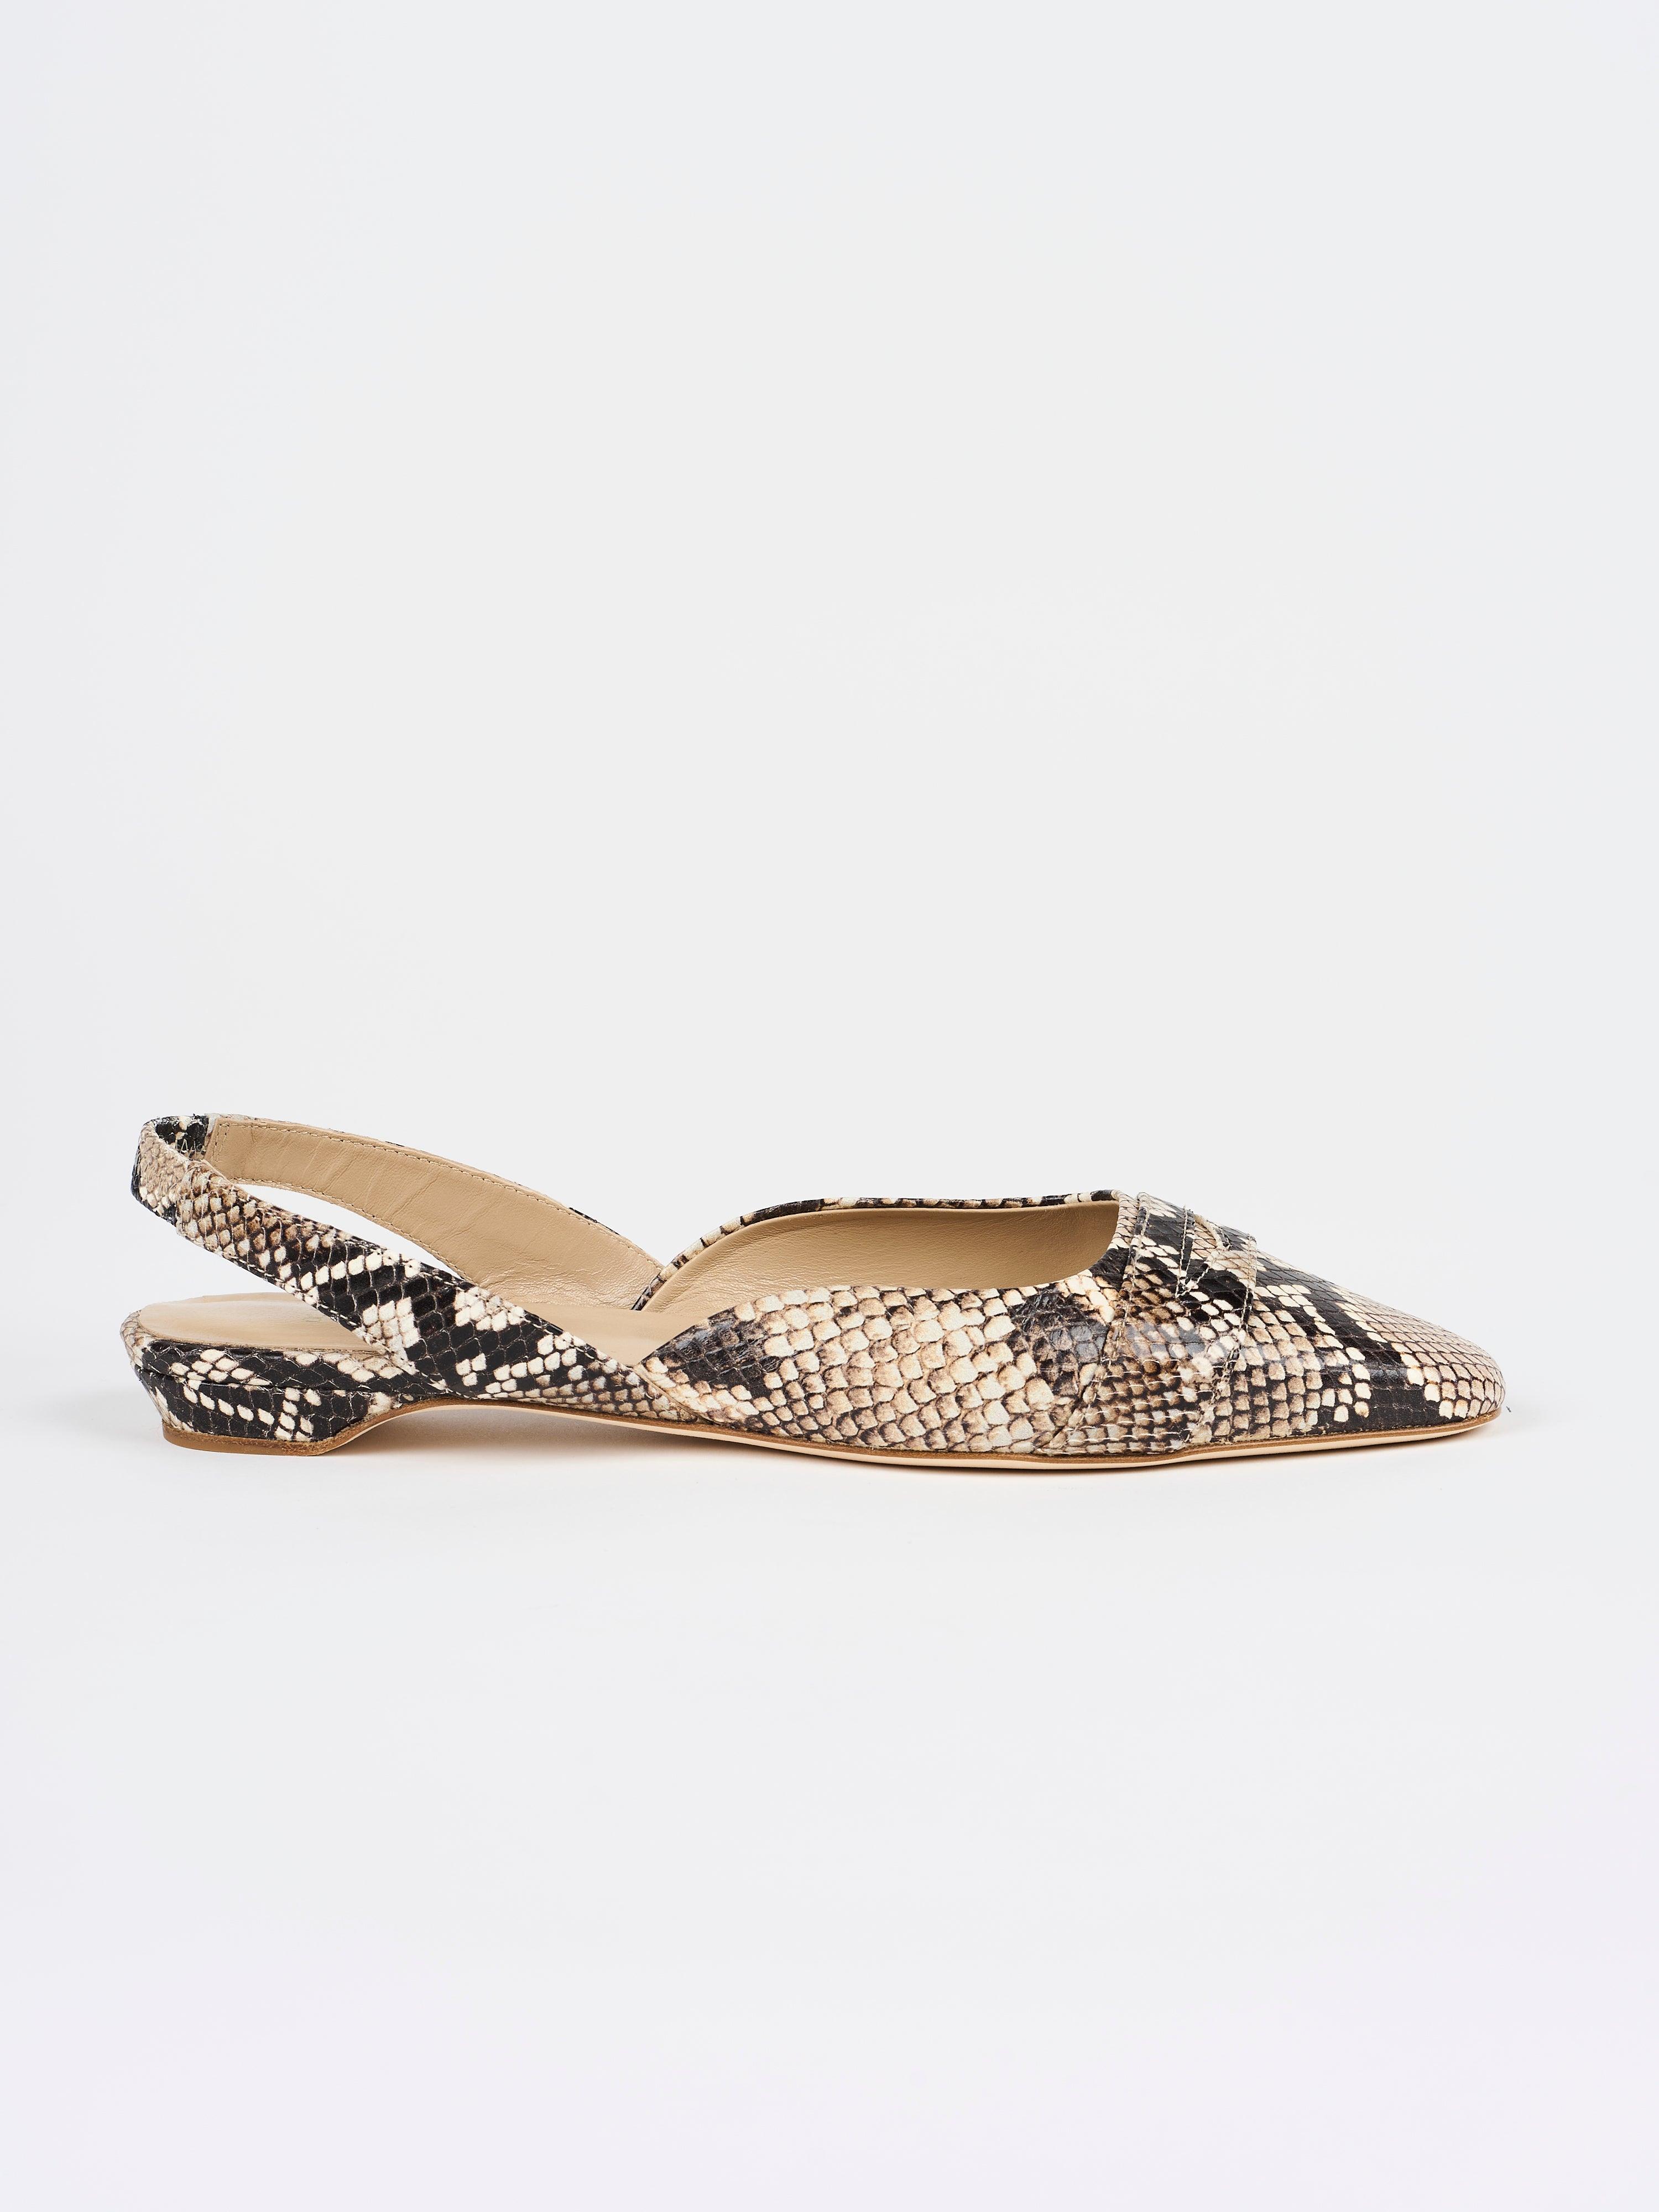 The Slingback in Embossed Python Side View